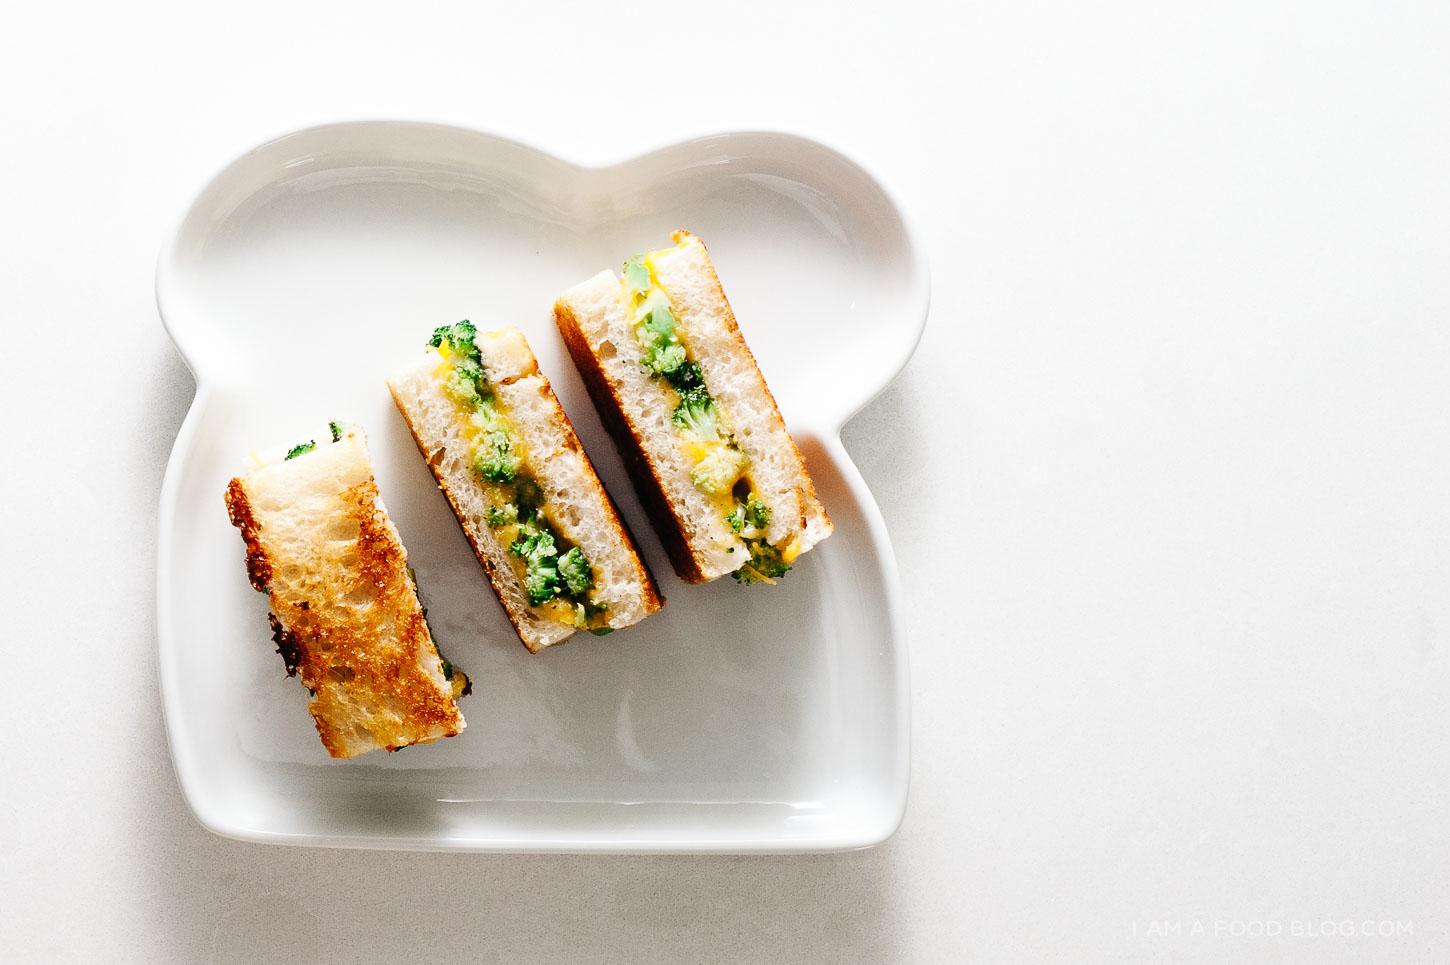 broccoli and cheddar grilled cheese recipe - www.iamafoodblog.com